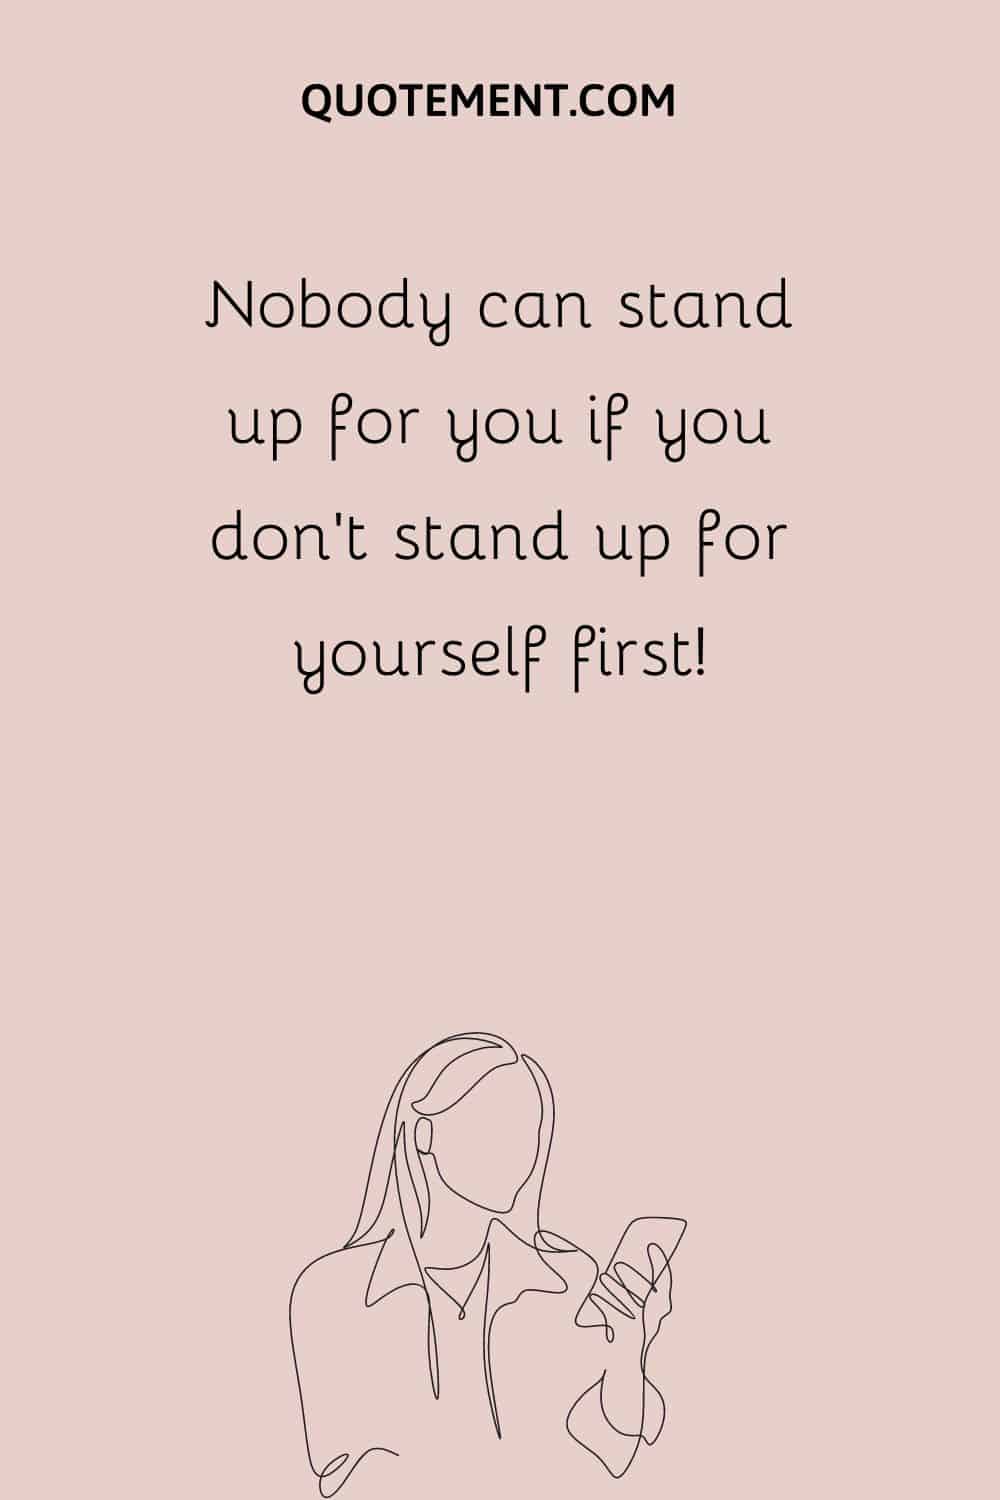 Nobody can stand up for you if you don’t stand up for yourself first